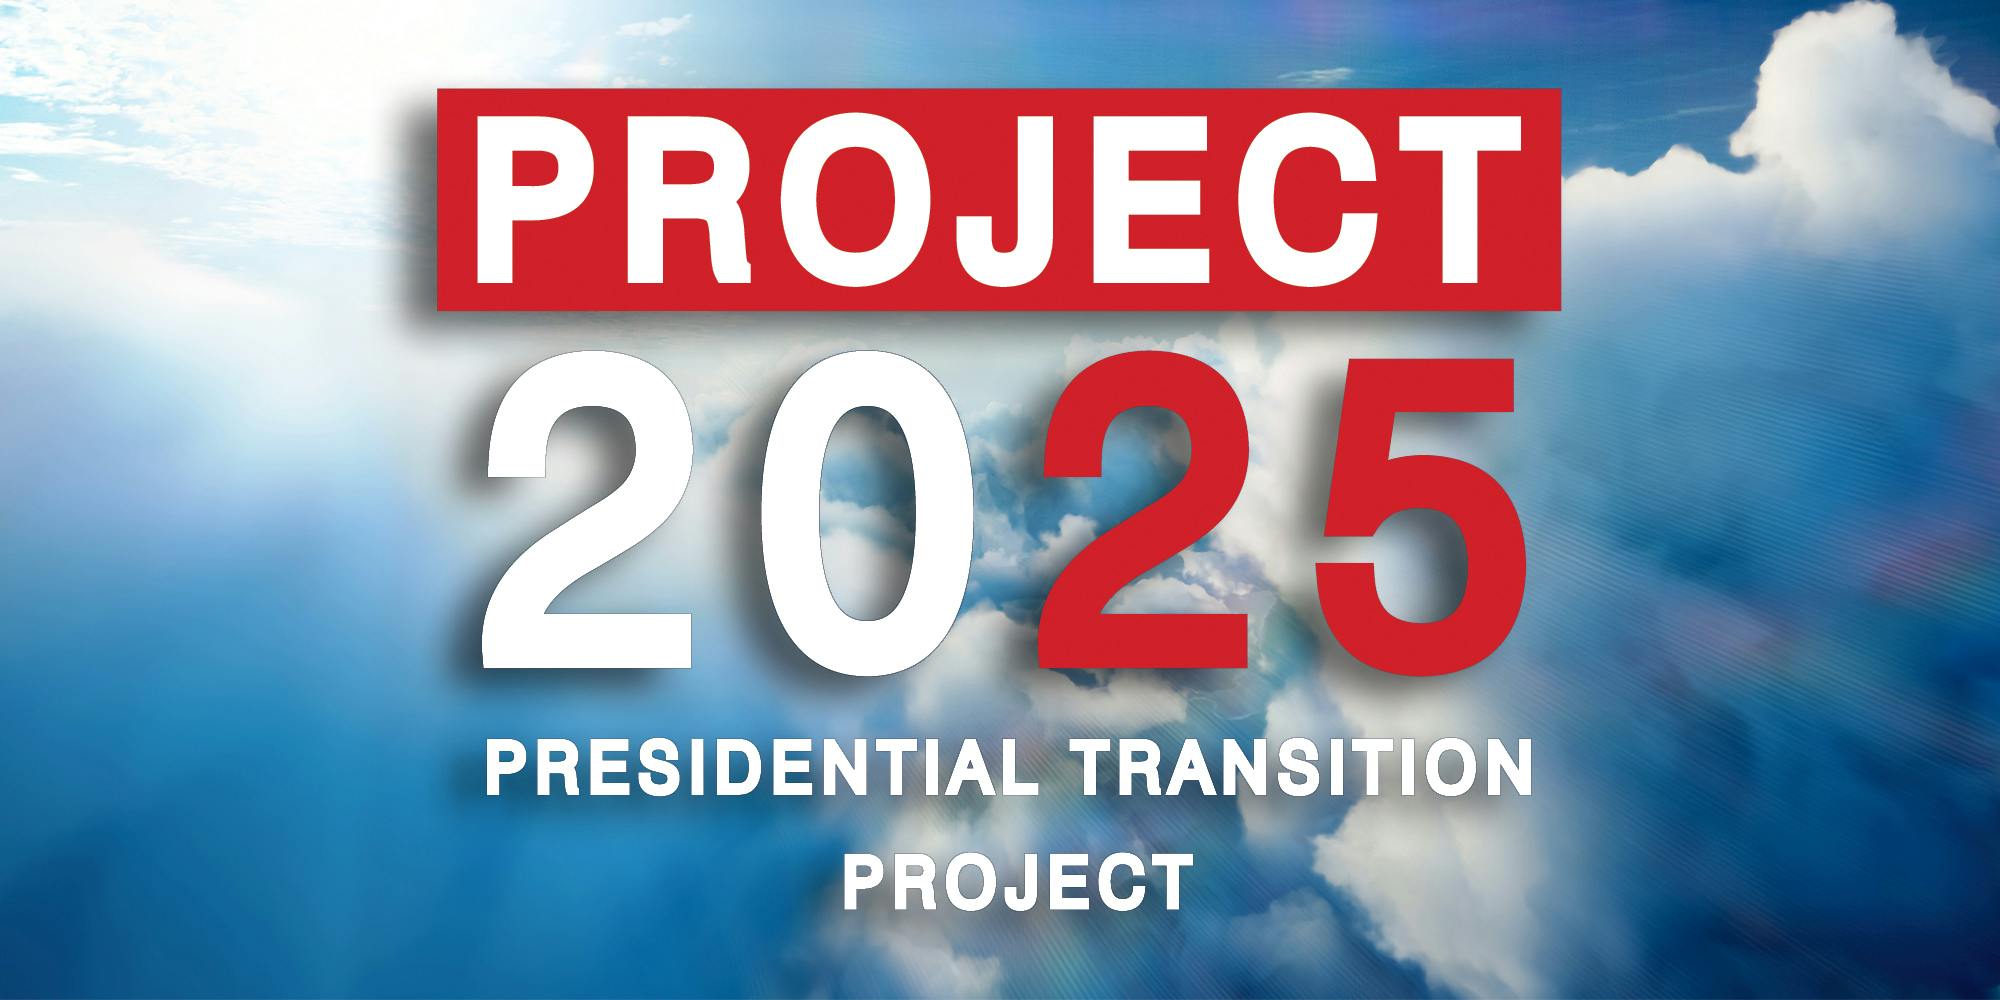 Project 2025 logo over clouds in the sky